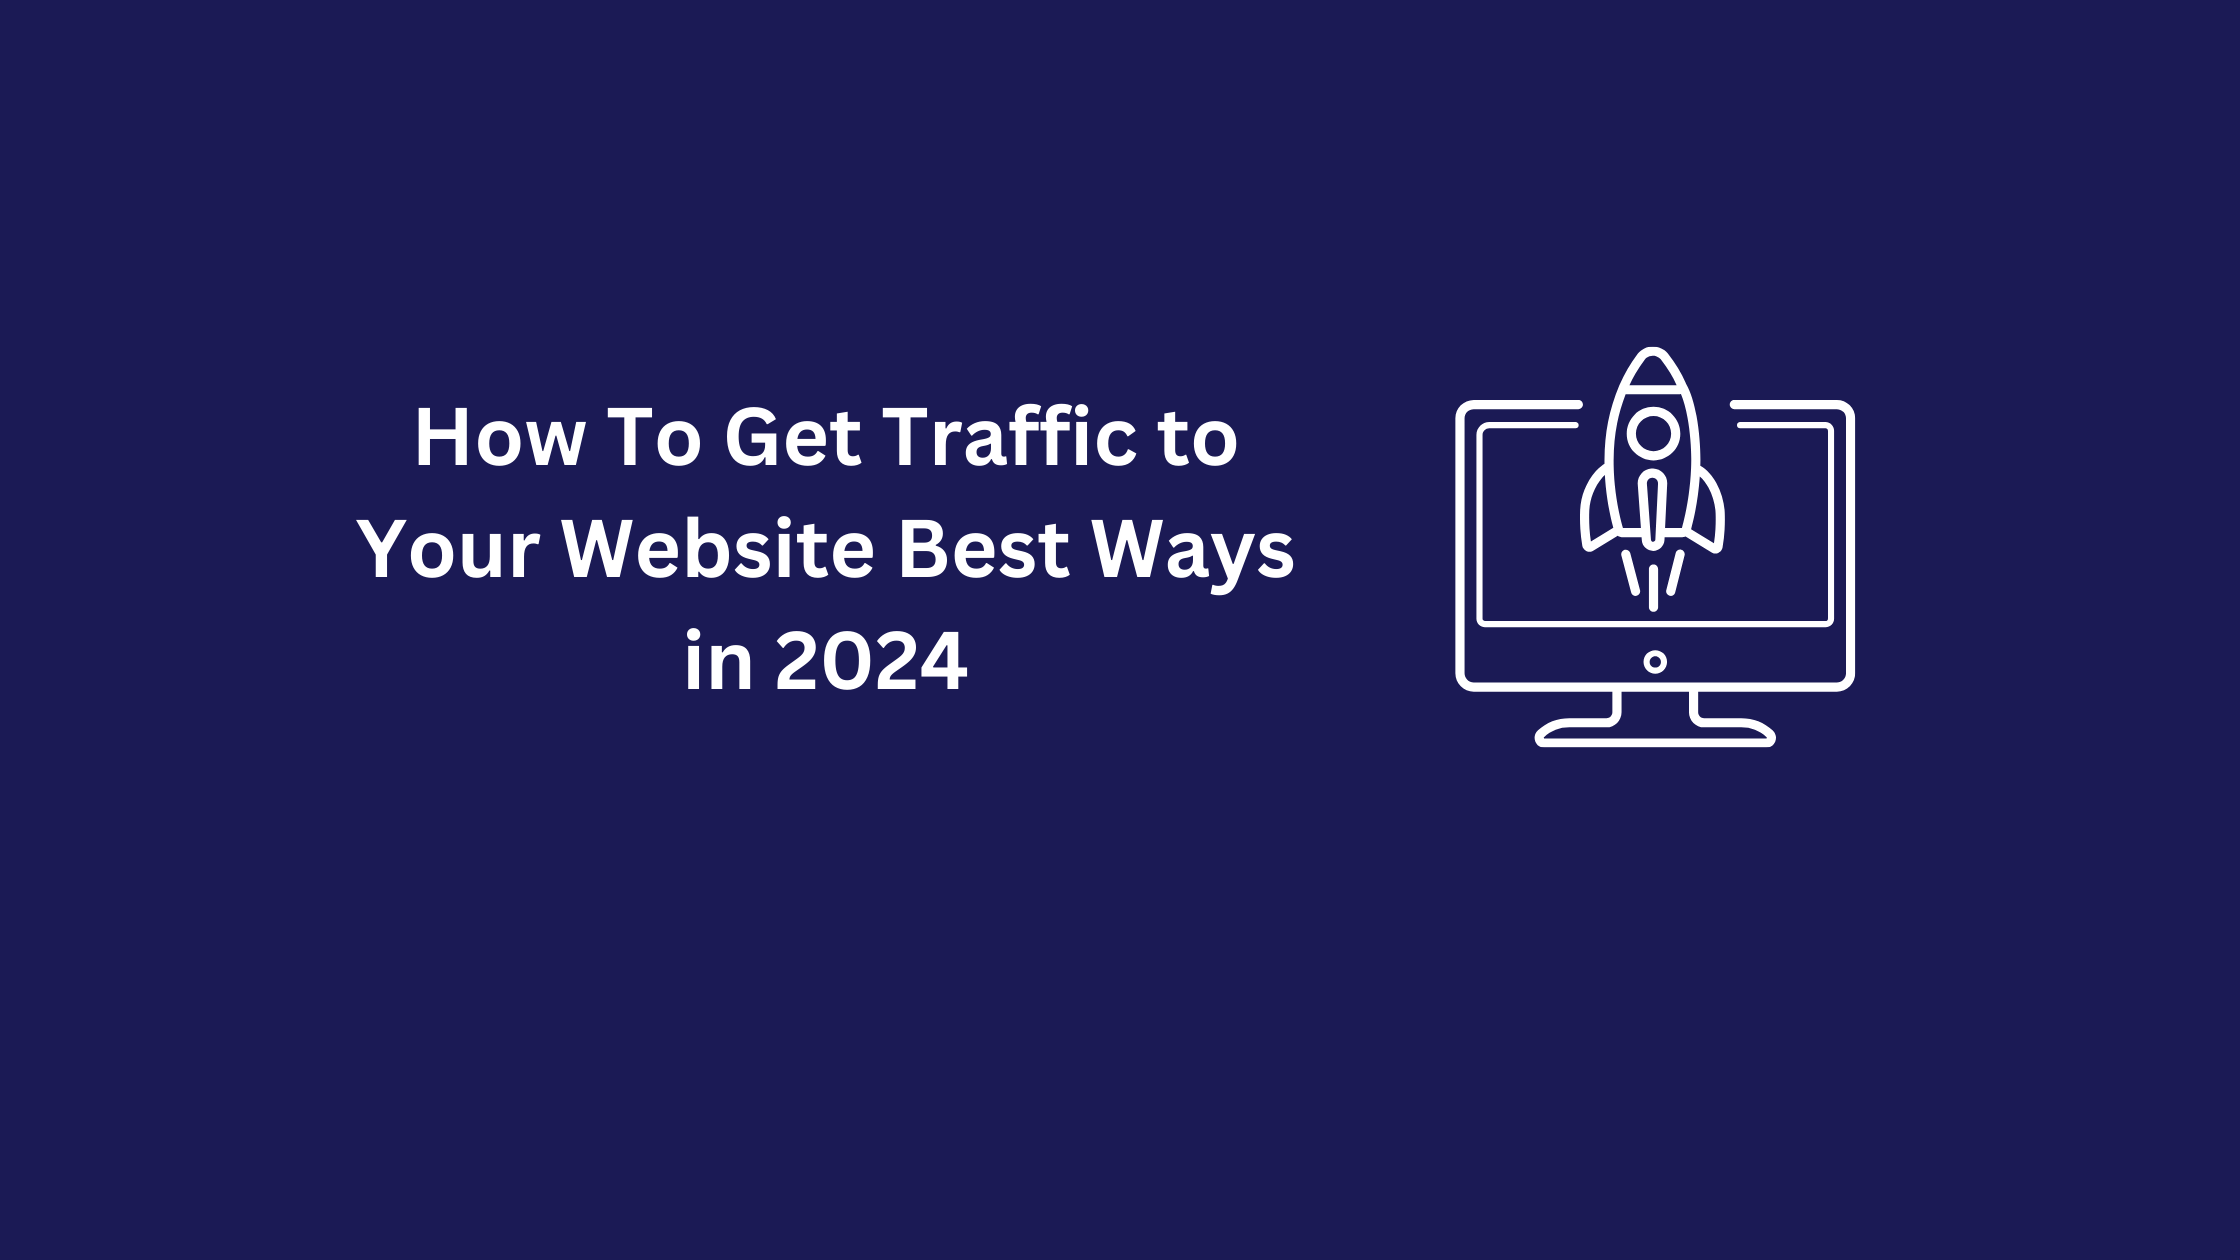 How To Get Traffic to Your Website Best Ways in 2024